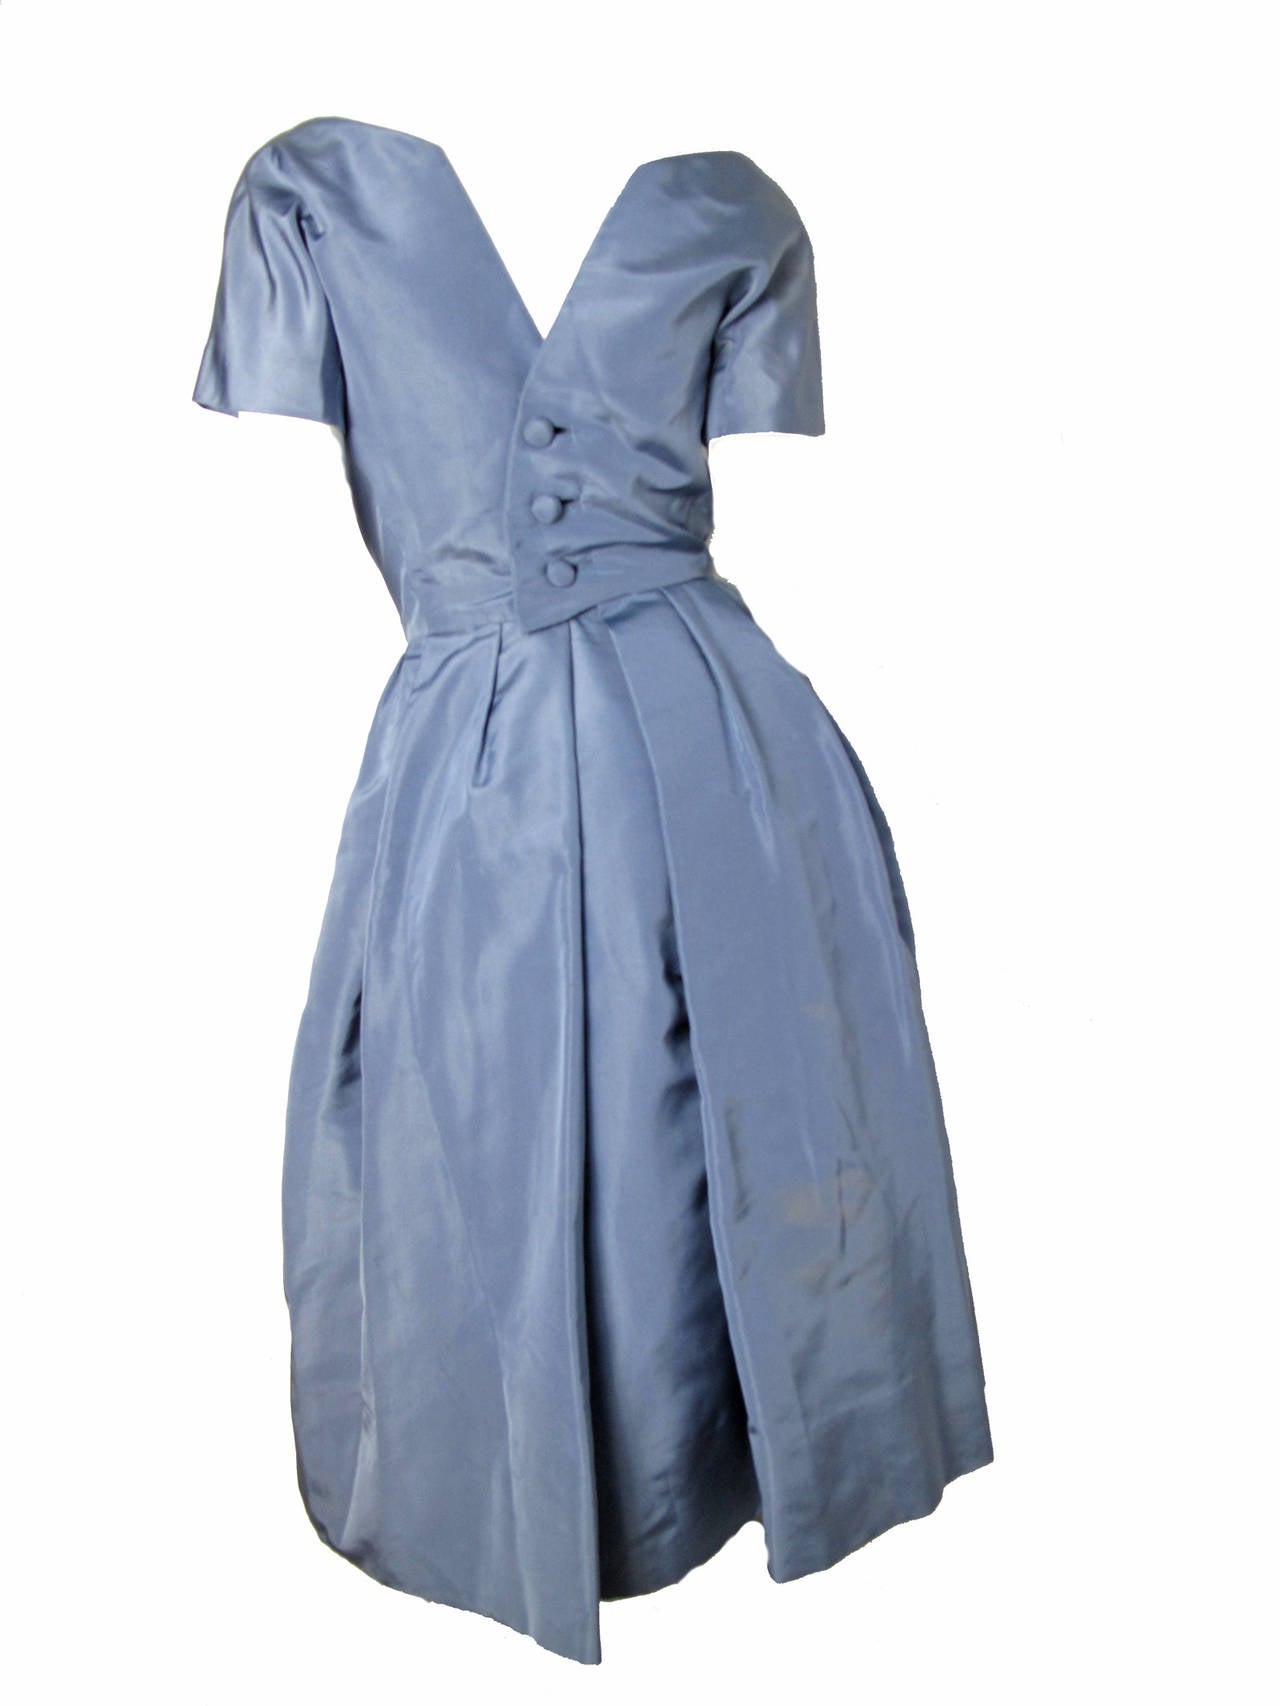 1950s Christian Dior blue taffeta dress with separate crinoline skirt. Condition: Fair, armholes have been repaired, some discoloration to silk, hem is coming undone and stitching is coming apart a seem at back- see photos.   

36" bust,